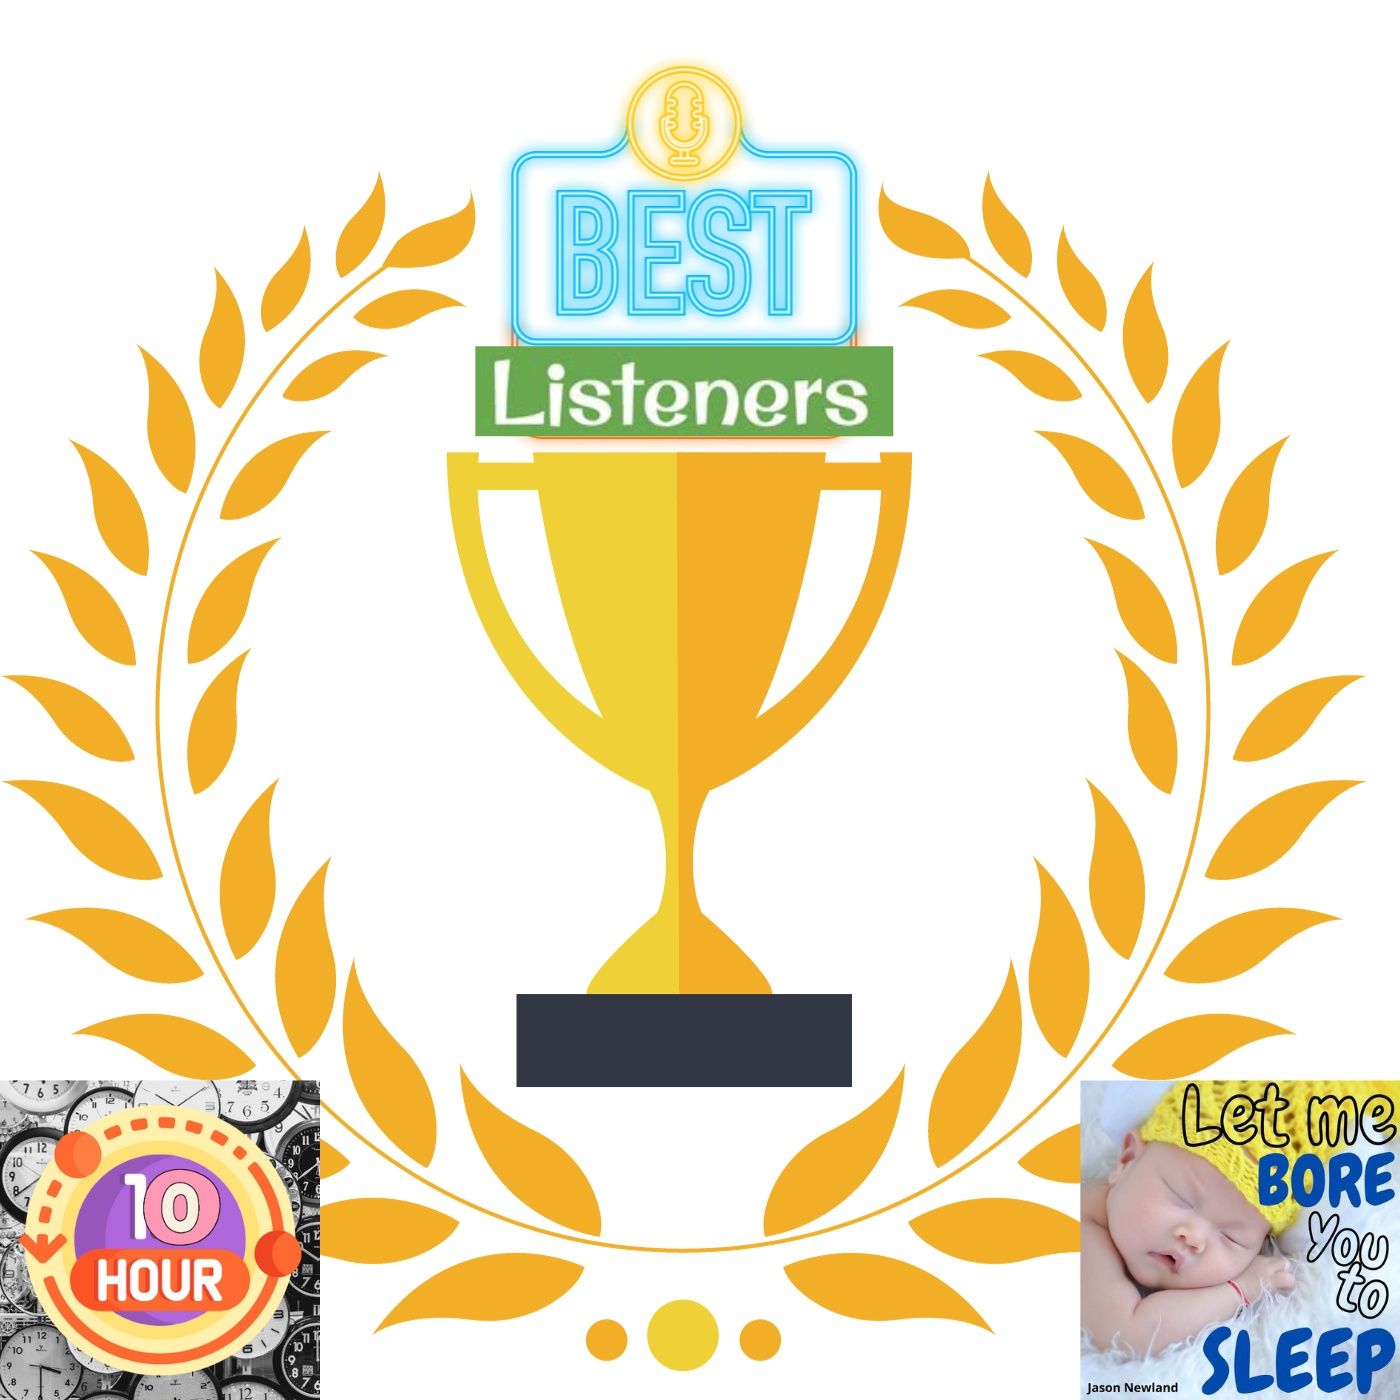 (10 hours) #1047 - I have the BEST listeners - Let me bore you to sleep